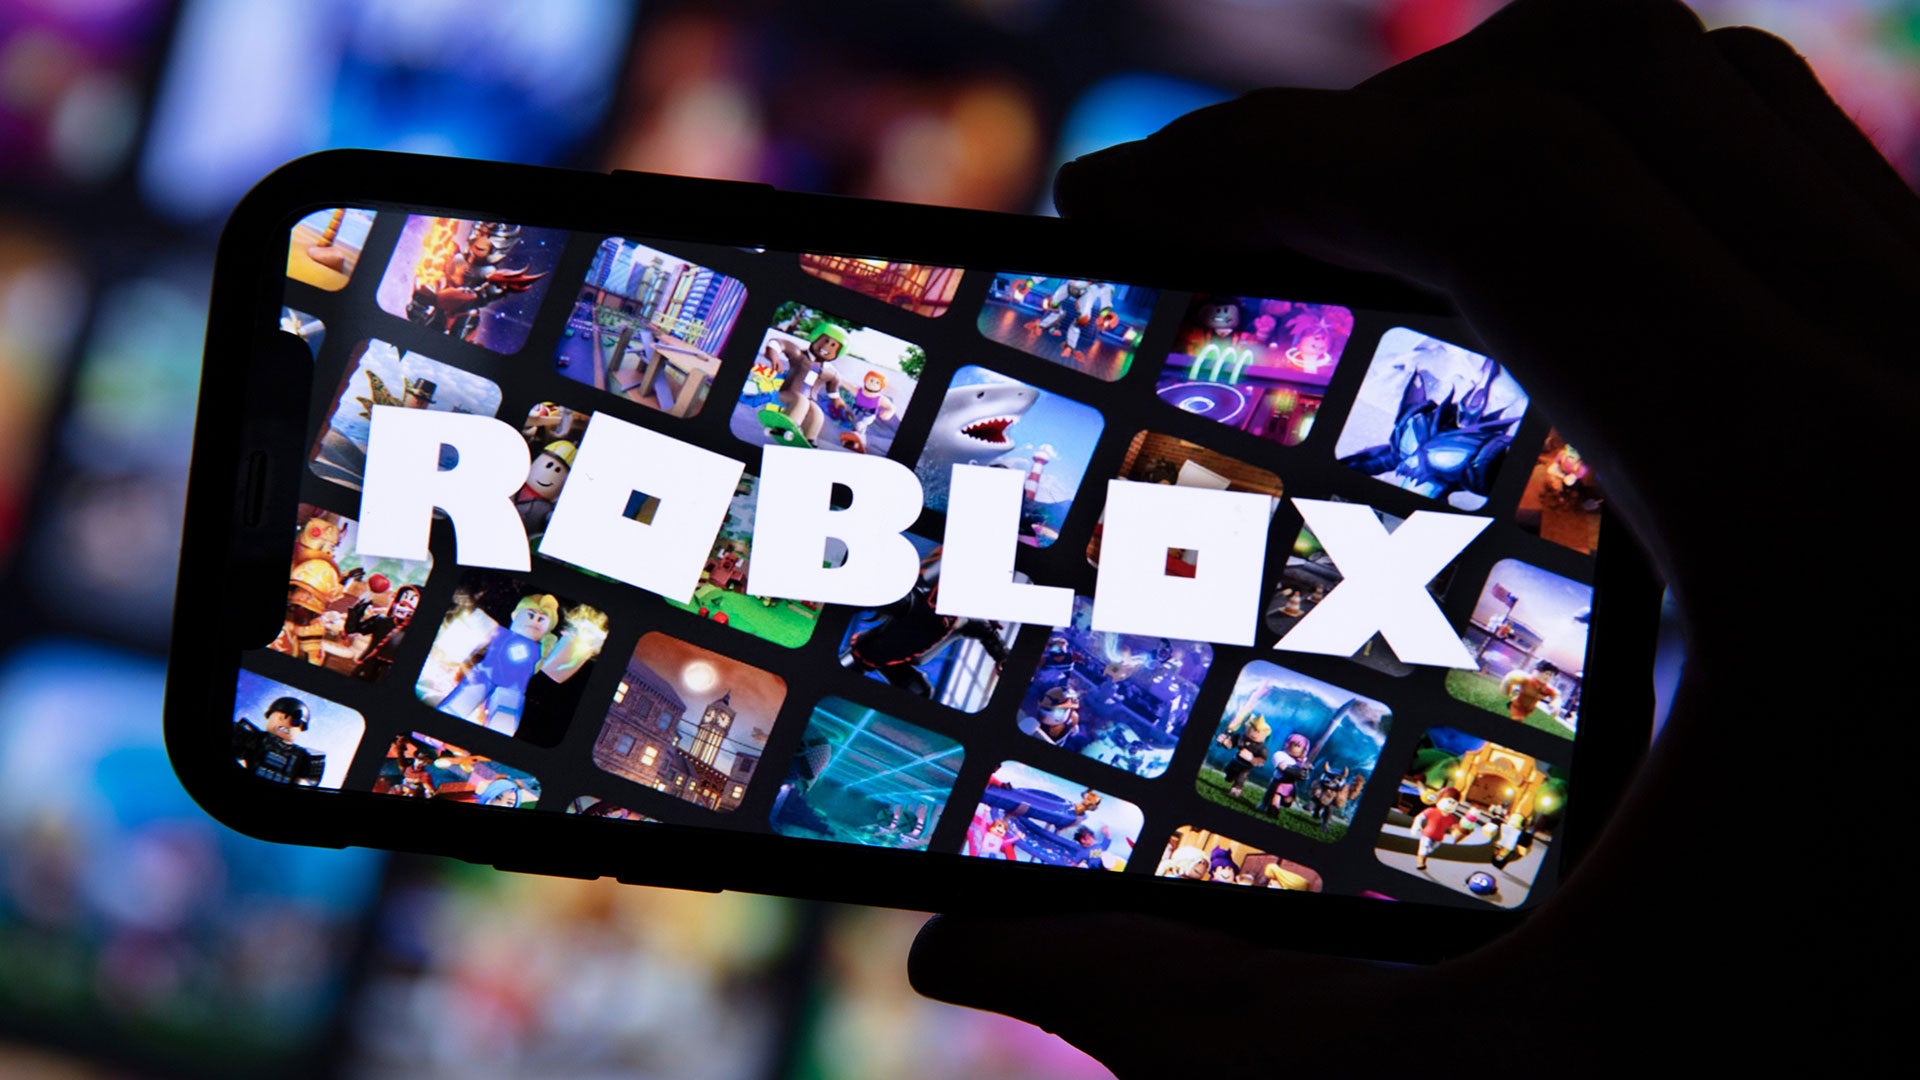 Roblox Plans to Launch a Safe Voice Chat to Talk with Friends.